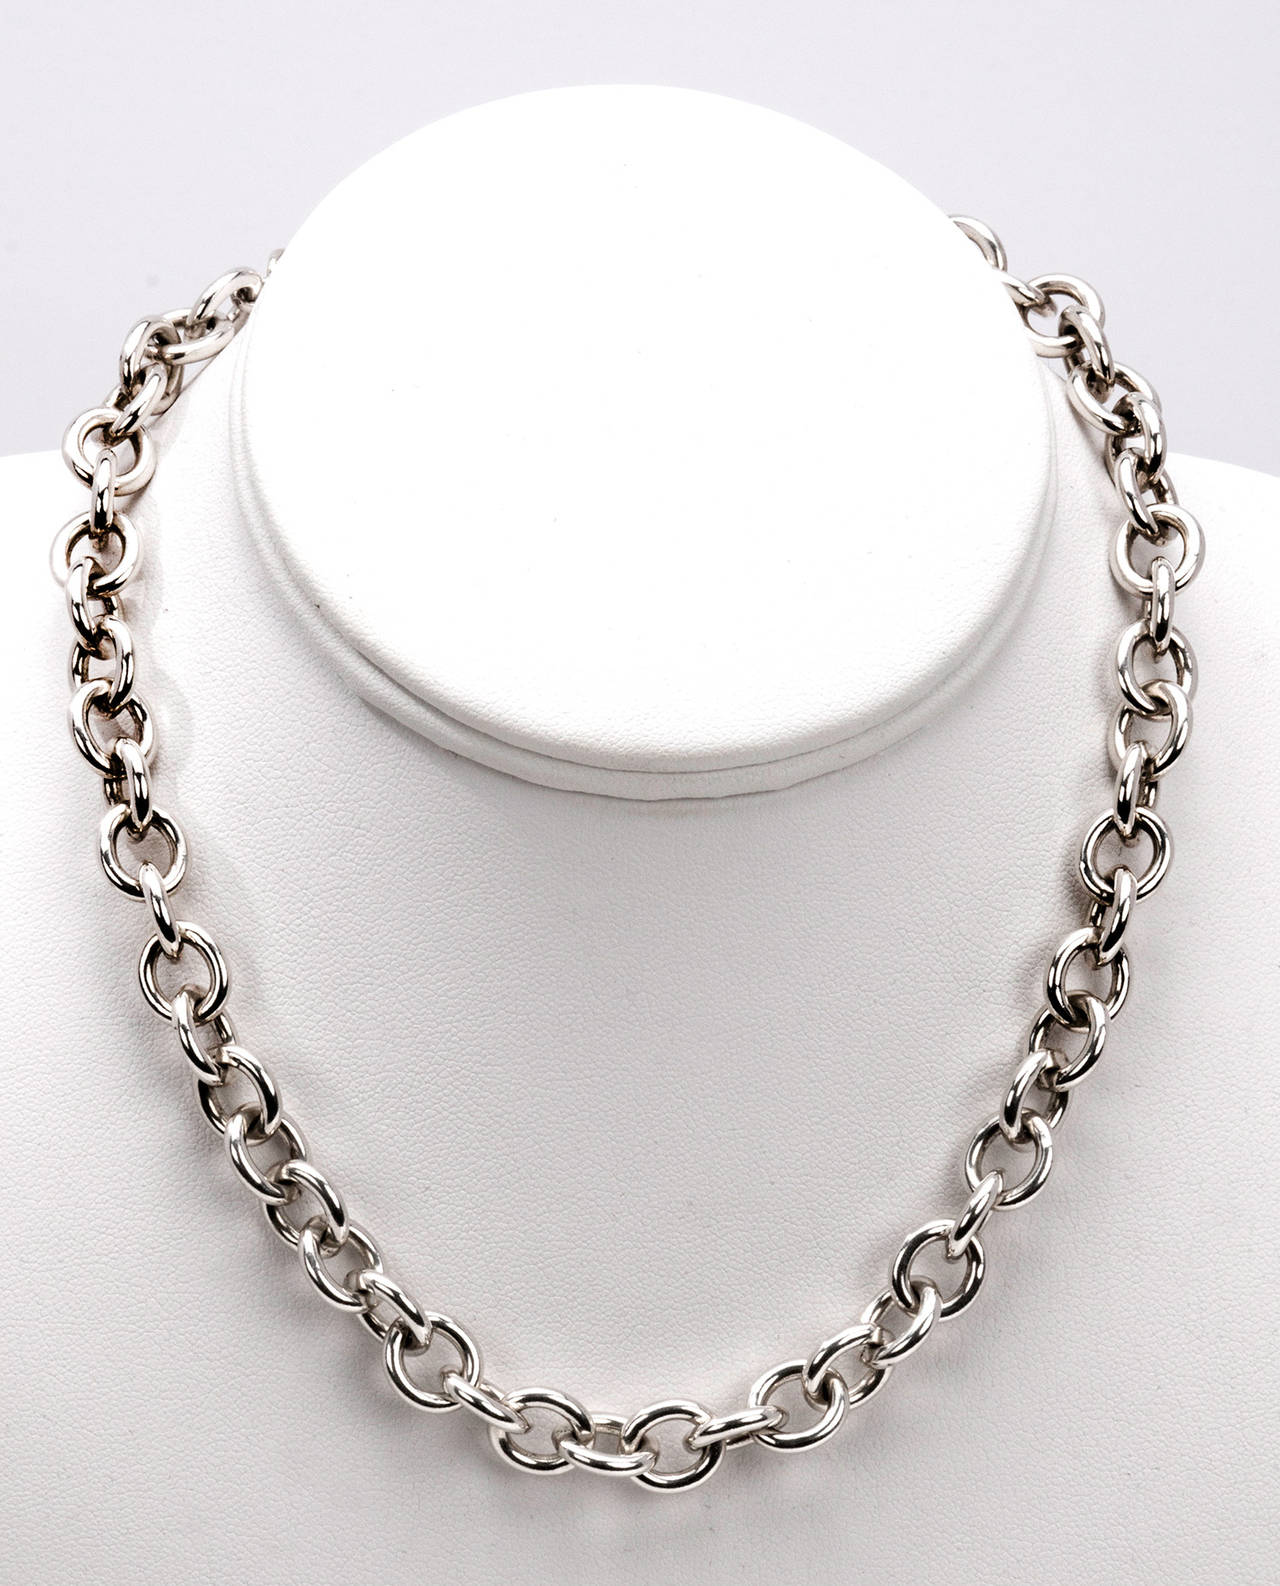 Tiffany & Co Sterling Silver Necklace Chain 3